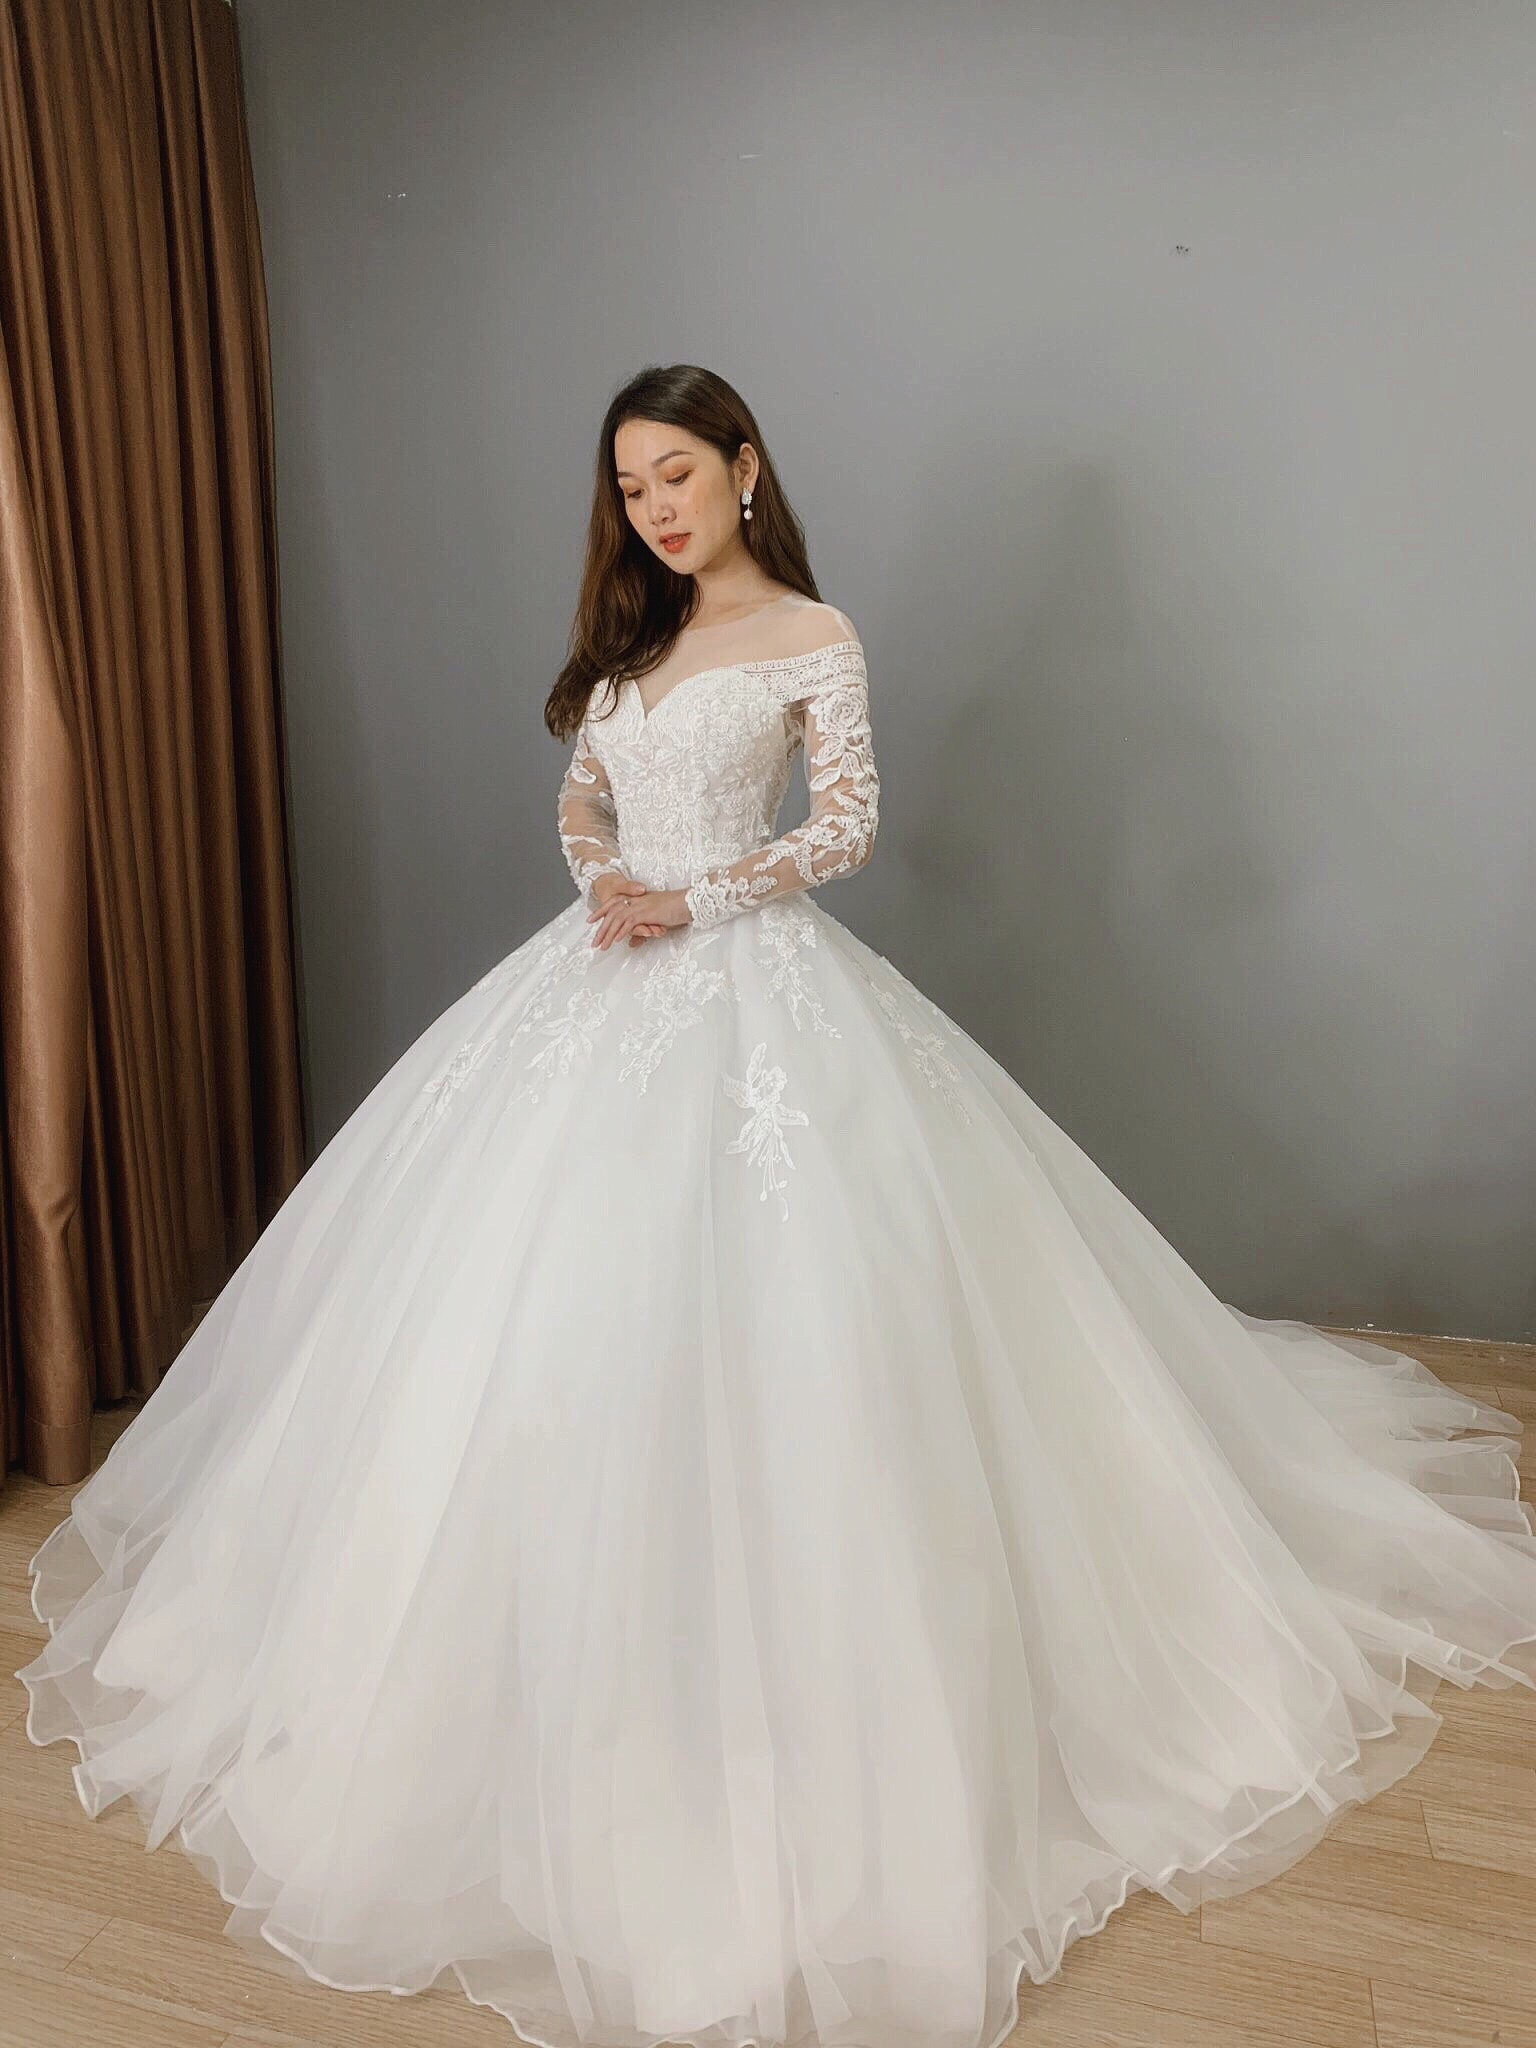 Feminine long sleeves floral lace white ball gown wedding dress